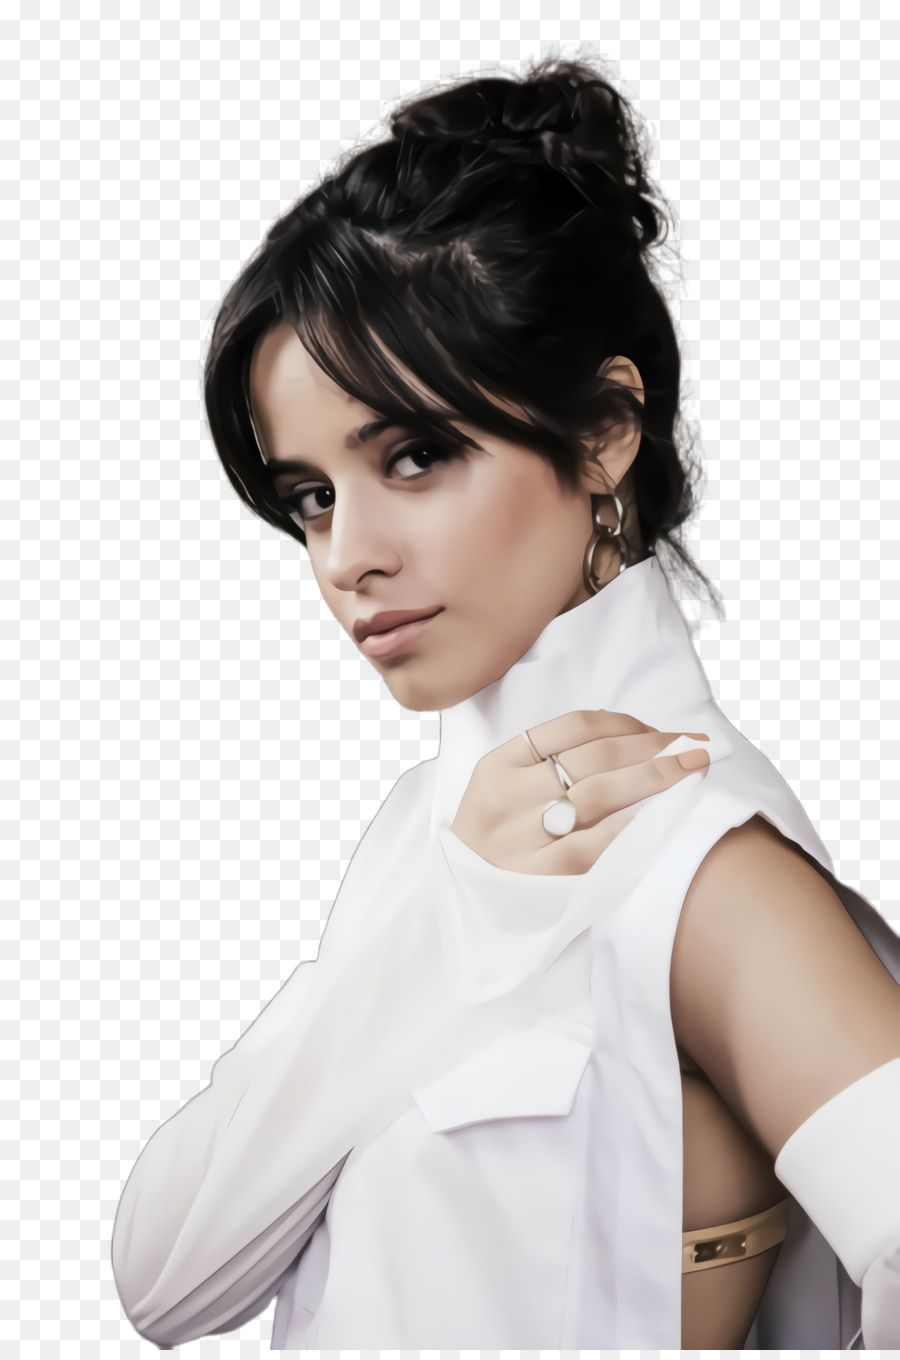 Camila Cabello Fotoshooting Fifth Harmony Photograph Singer-Songwriter - 